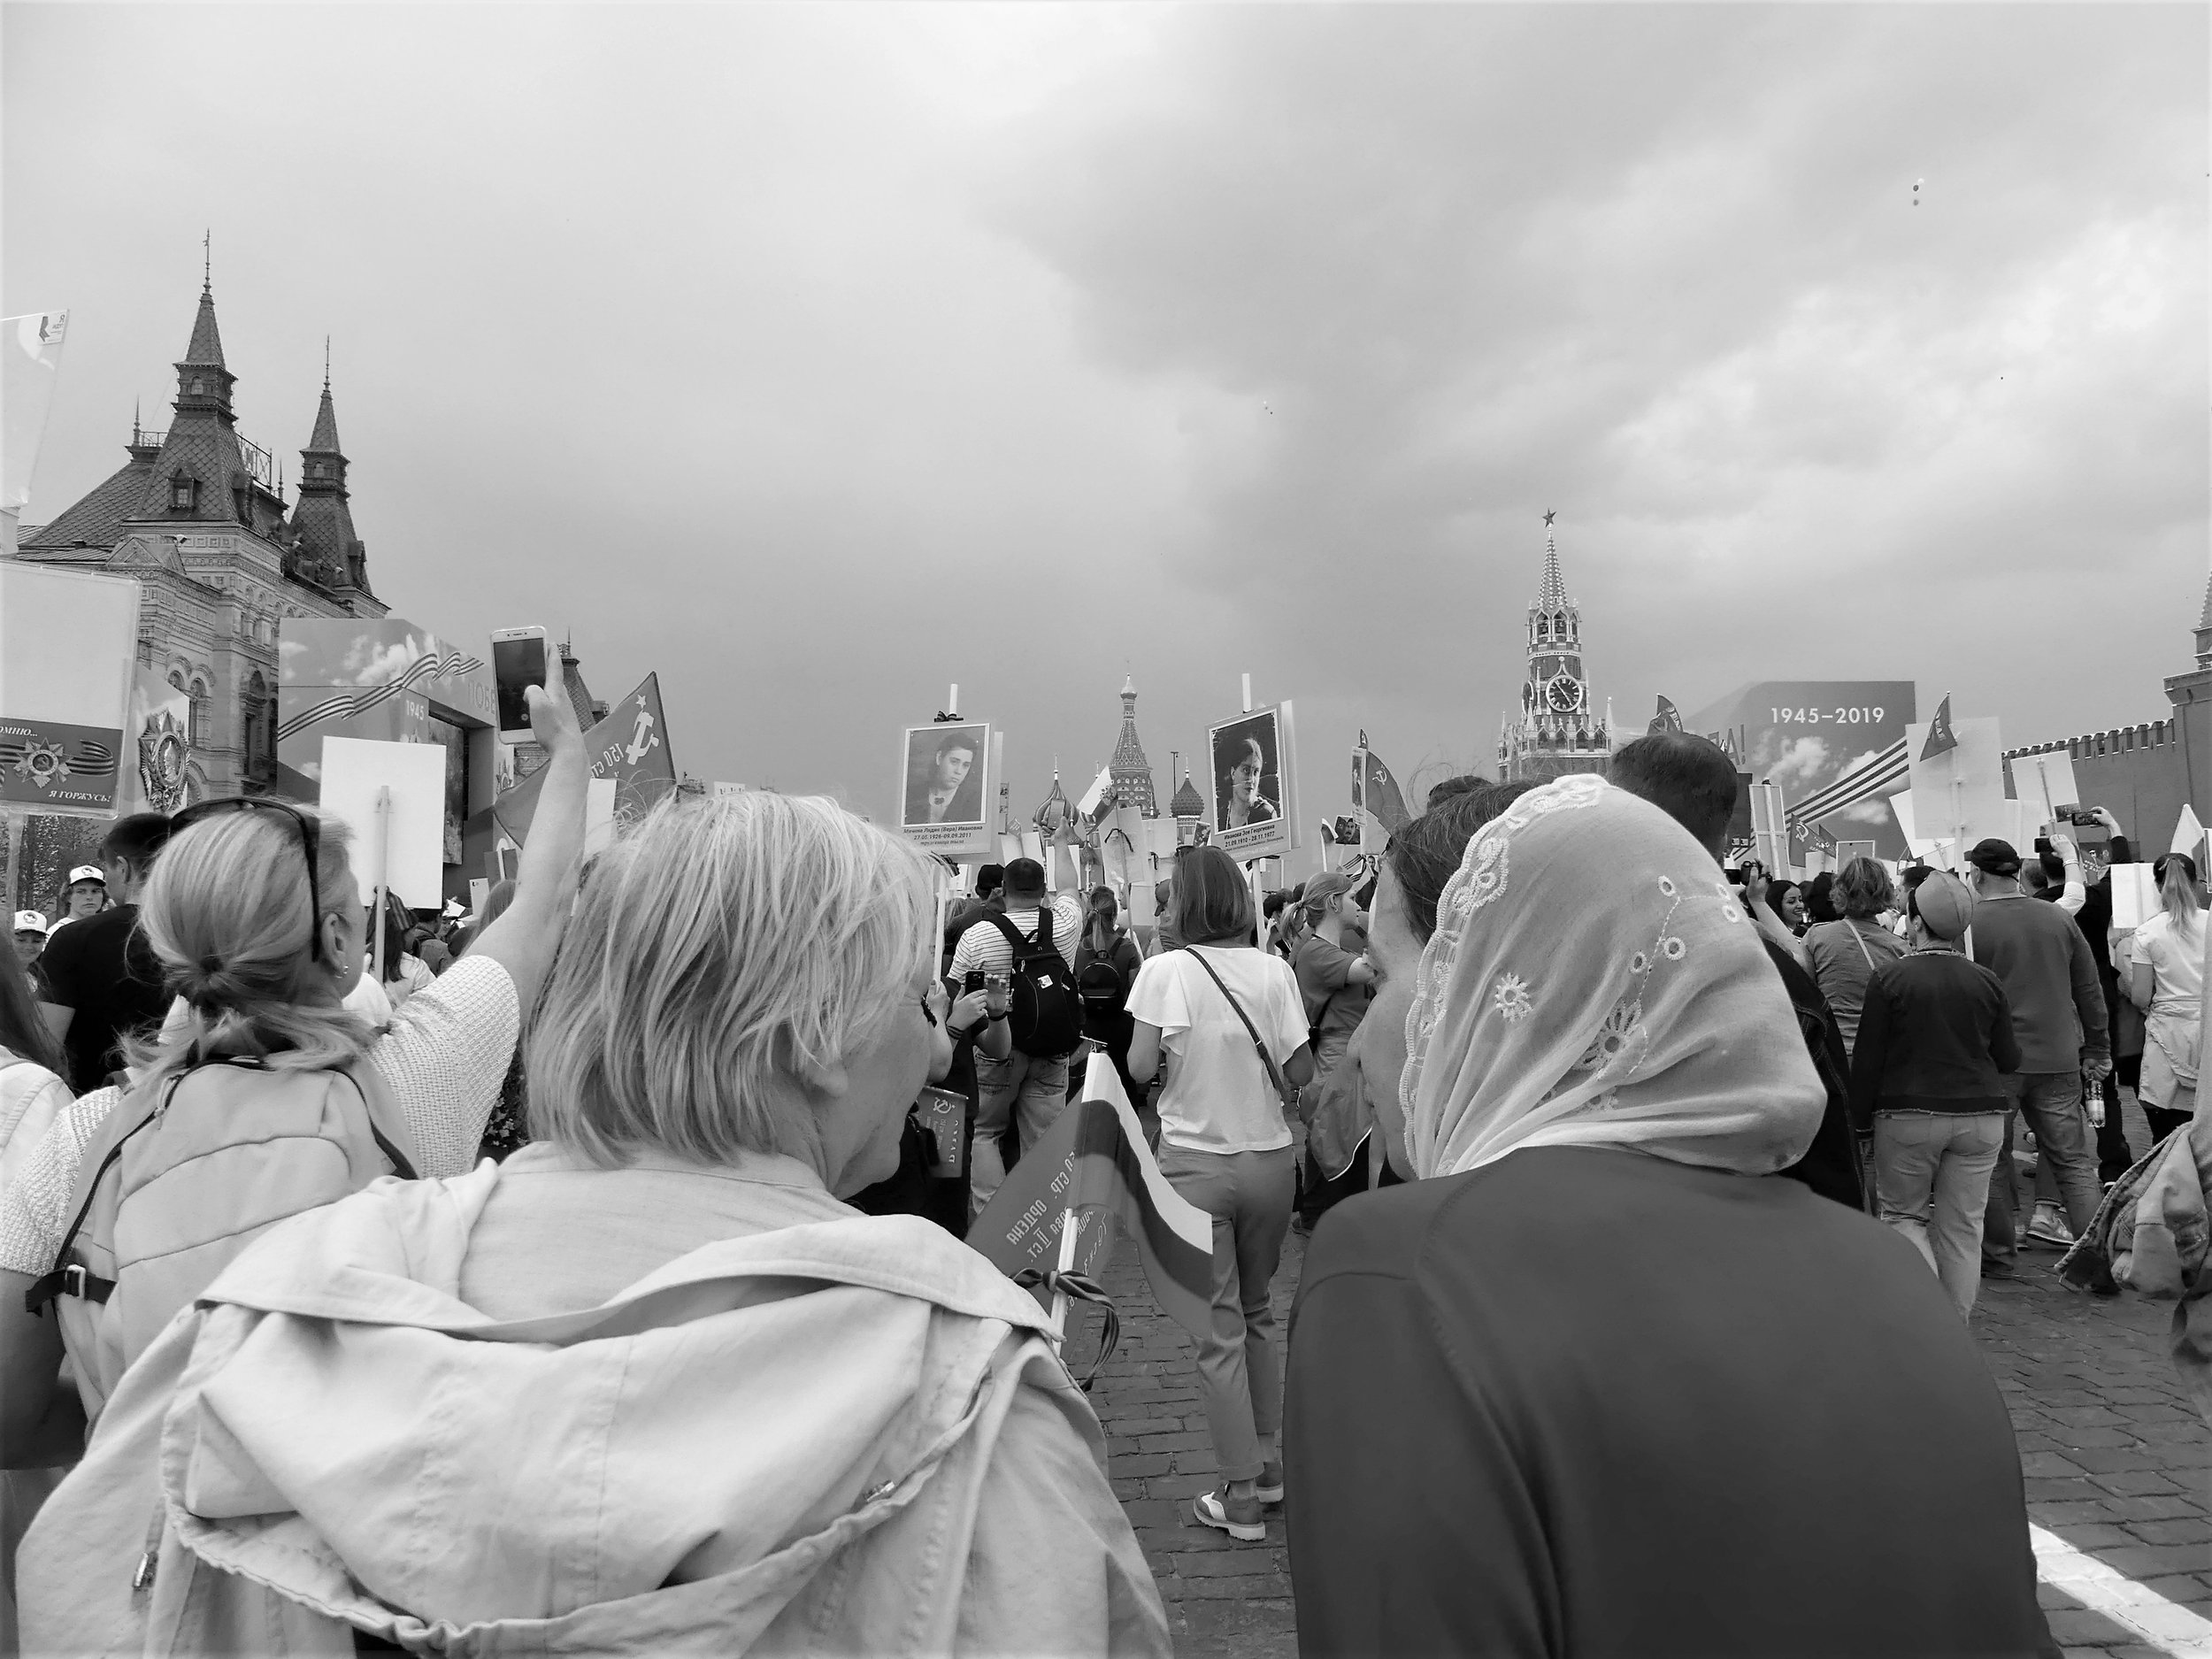  Two women quietly share their thoughts in the noisy crowd. 